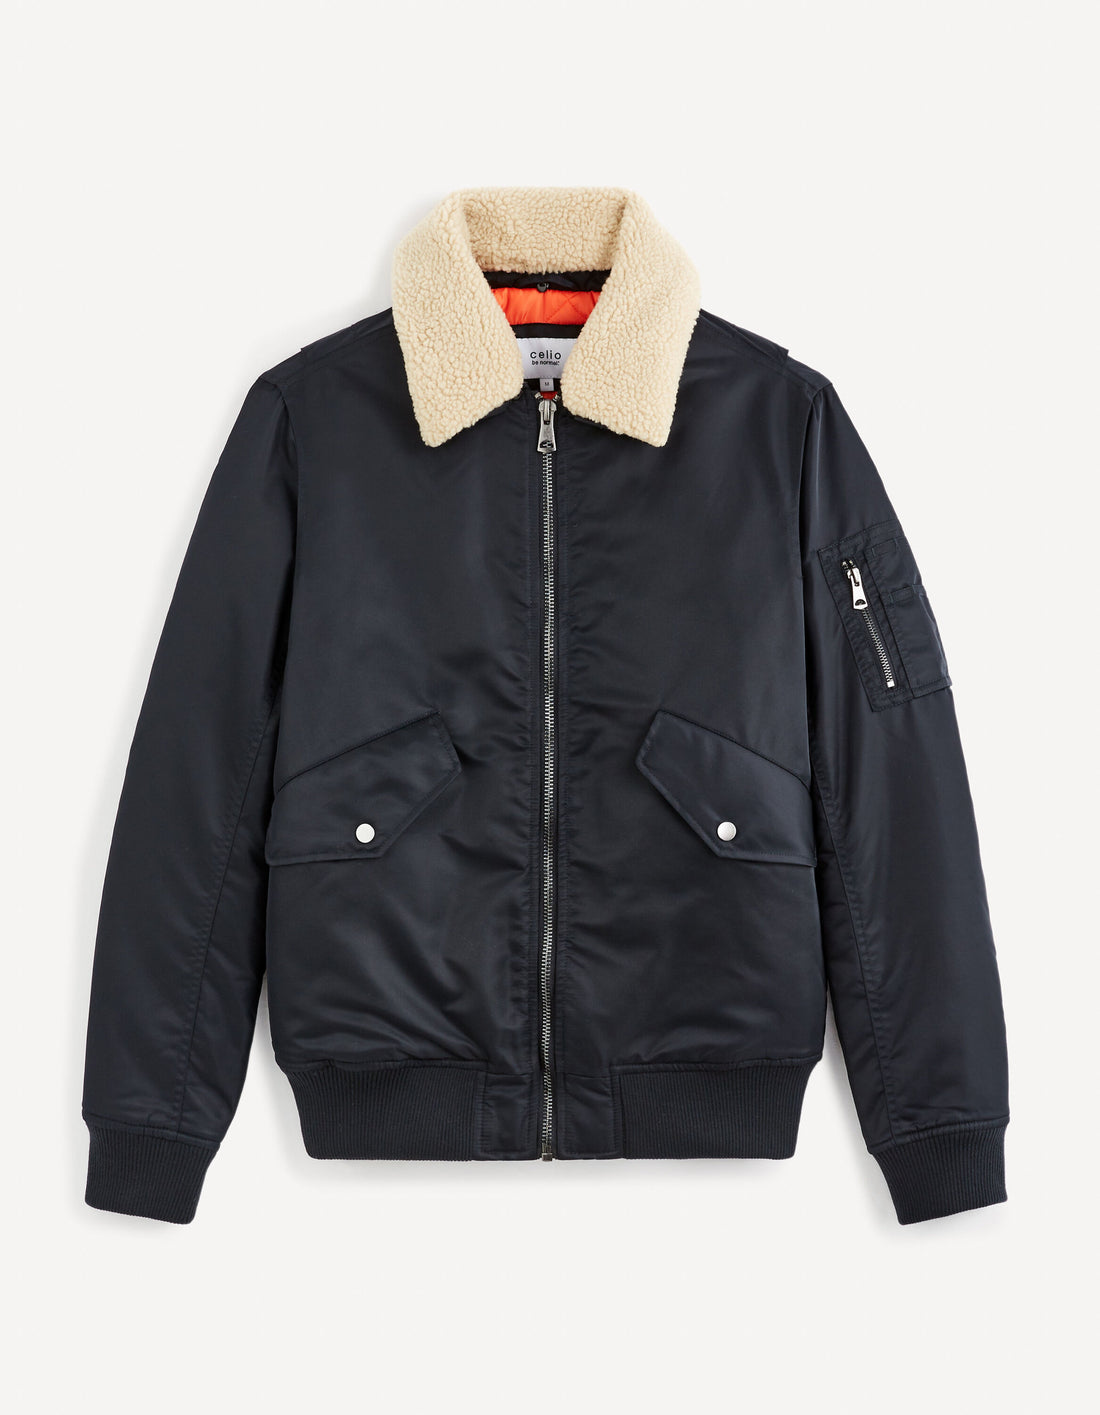 Bomber Down Jacket Lined With Sherpa_FUJAMESCOL_NAVY_01